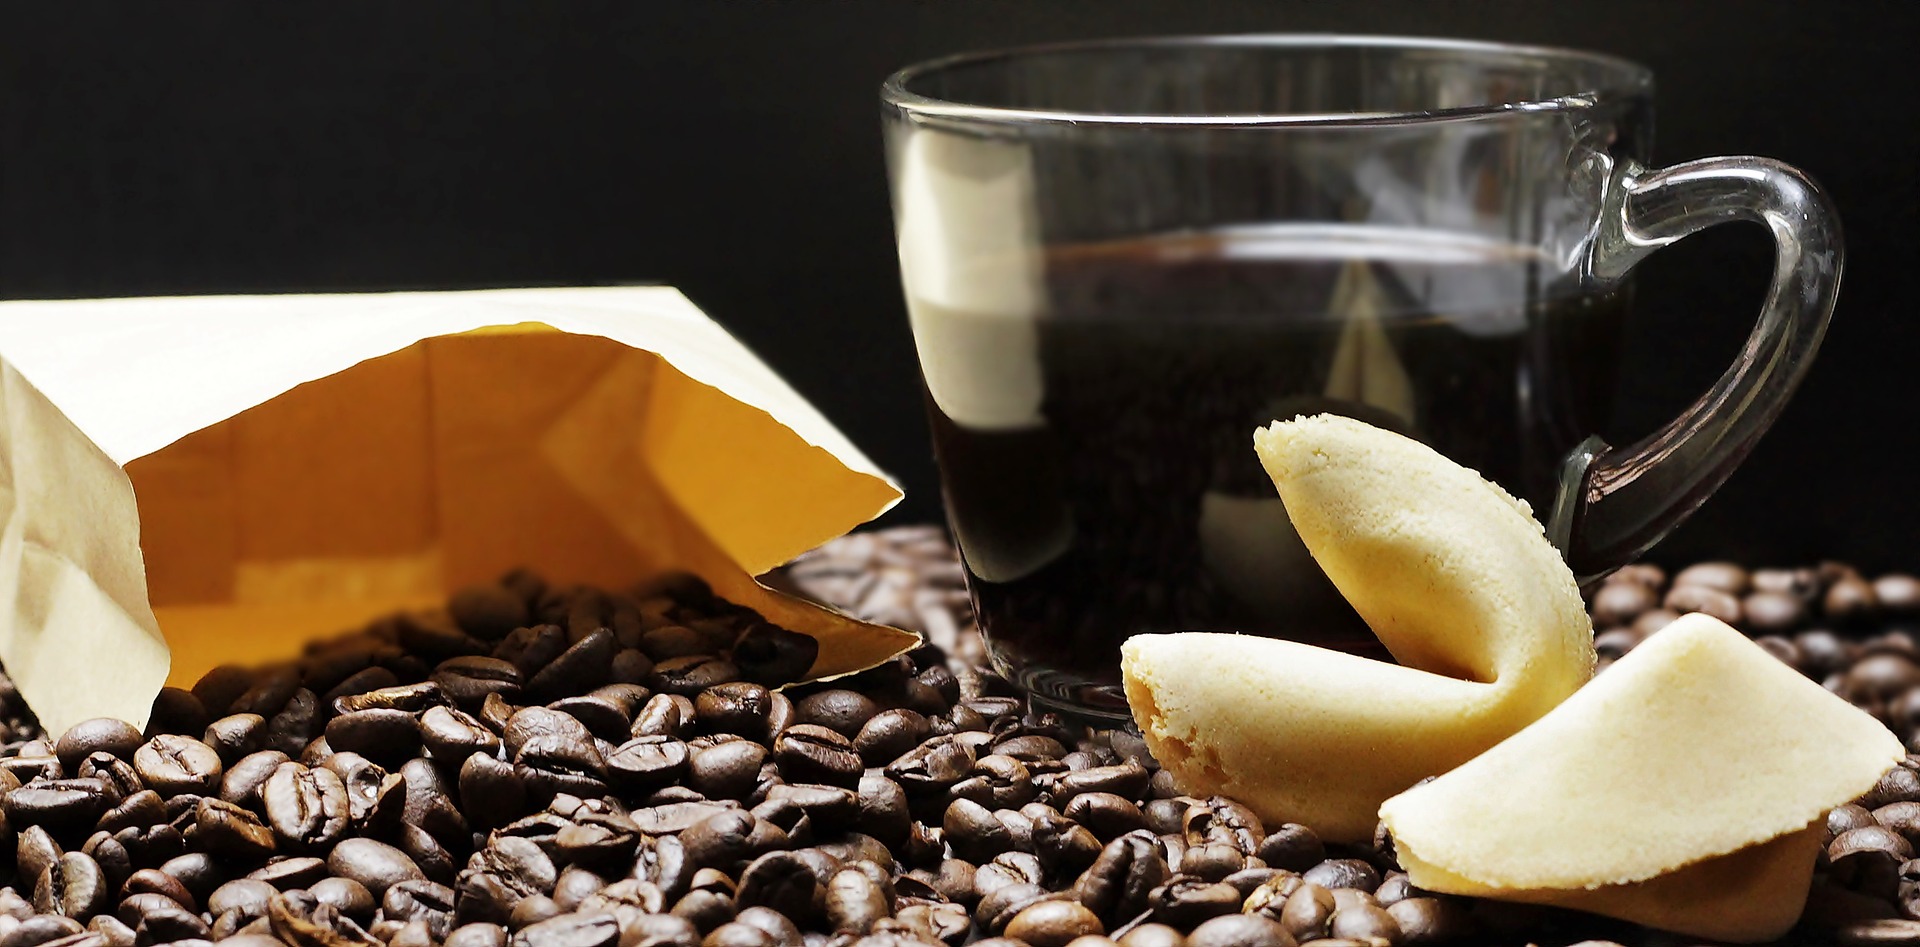 DIY Soluble Coffee Recipe at Home